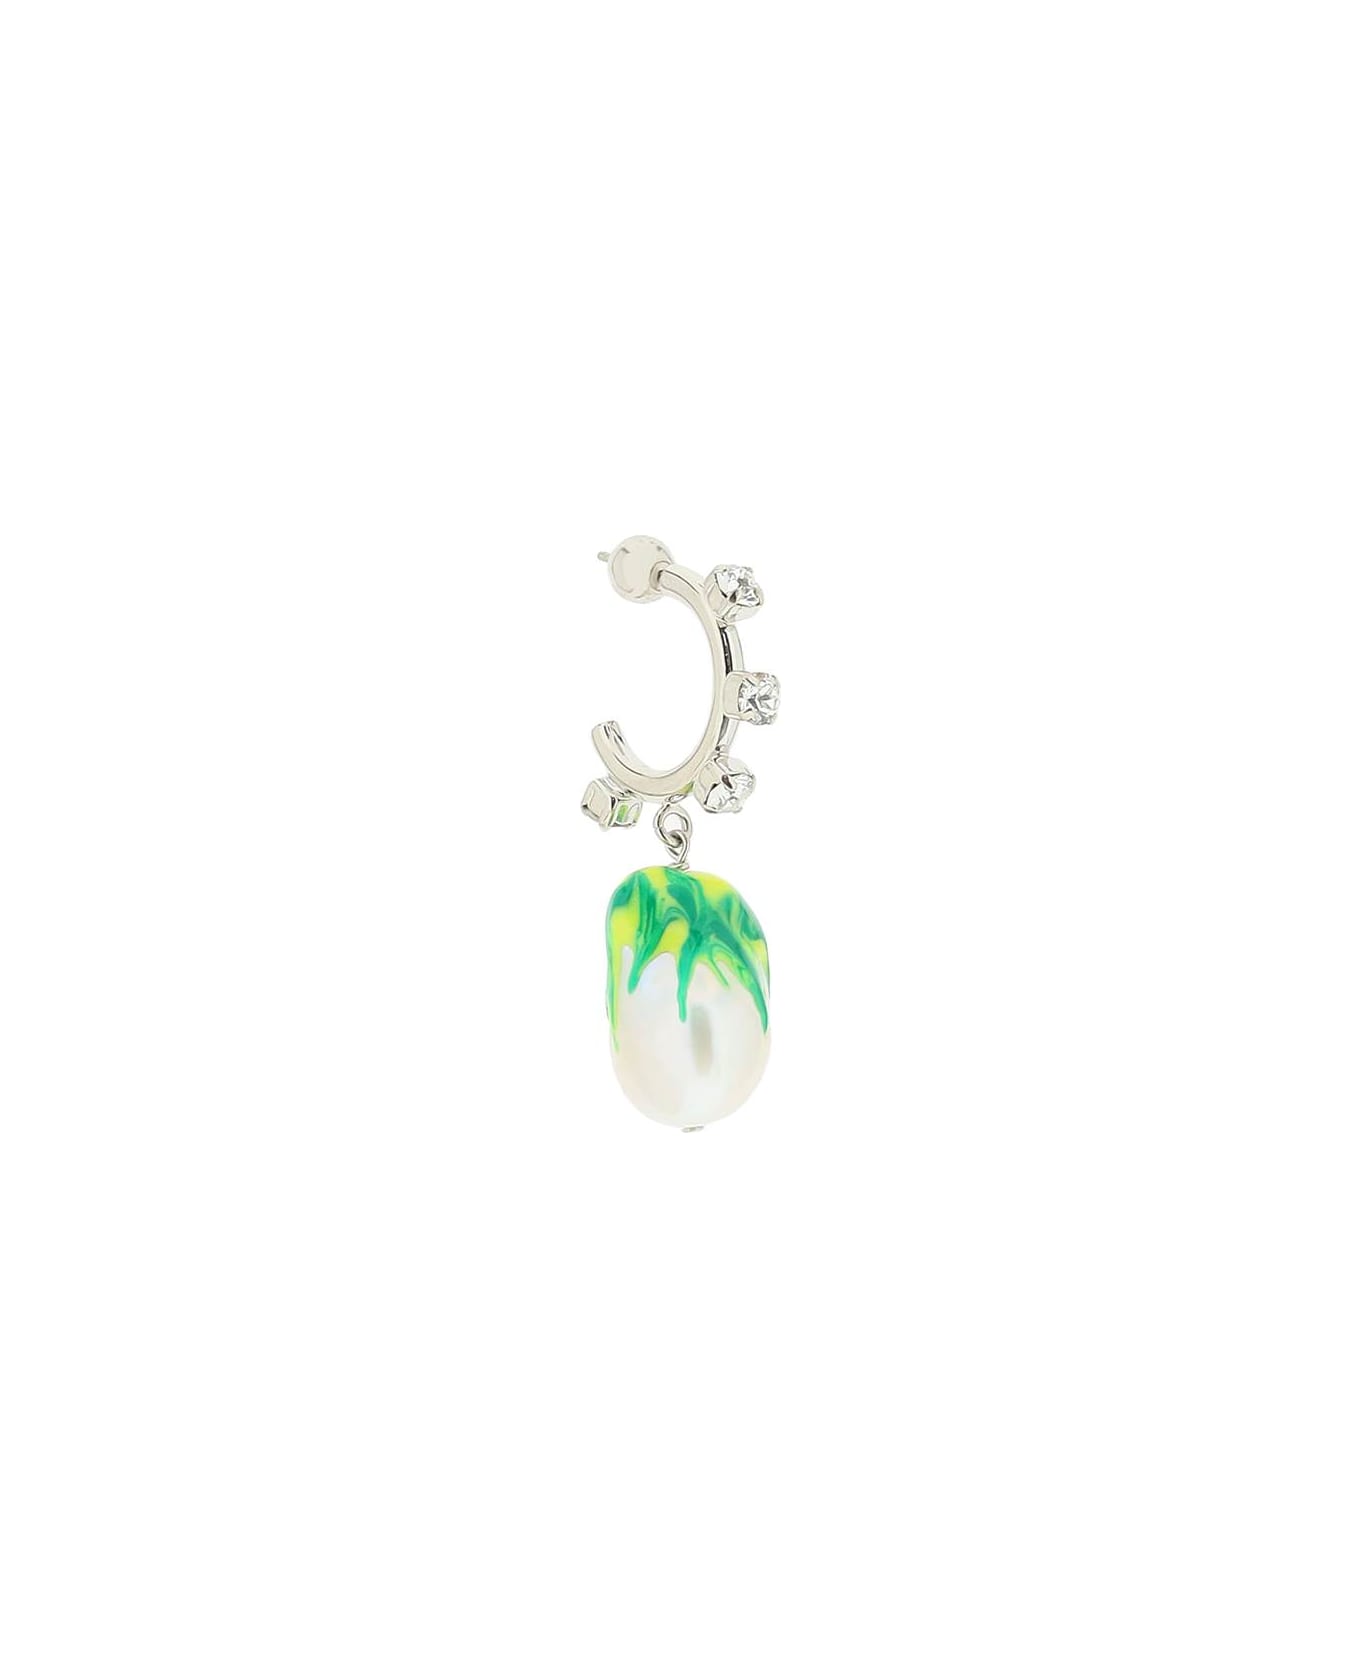 SafSafu 'jelly Melted' Earrings - SILVER GREEN (Silver)